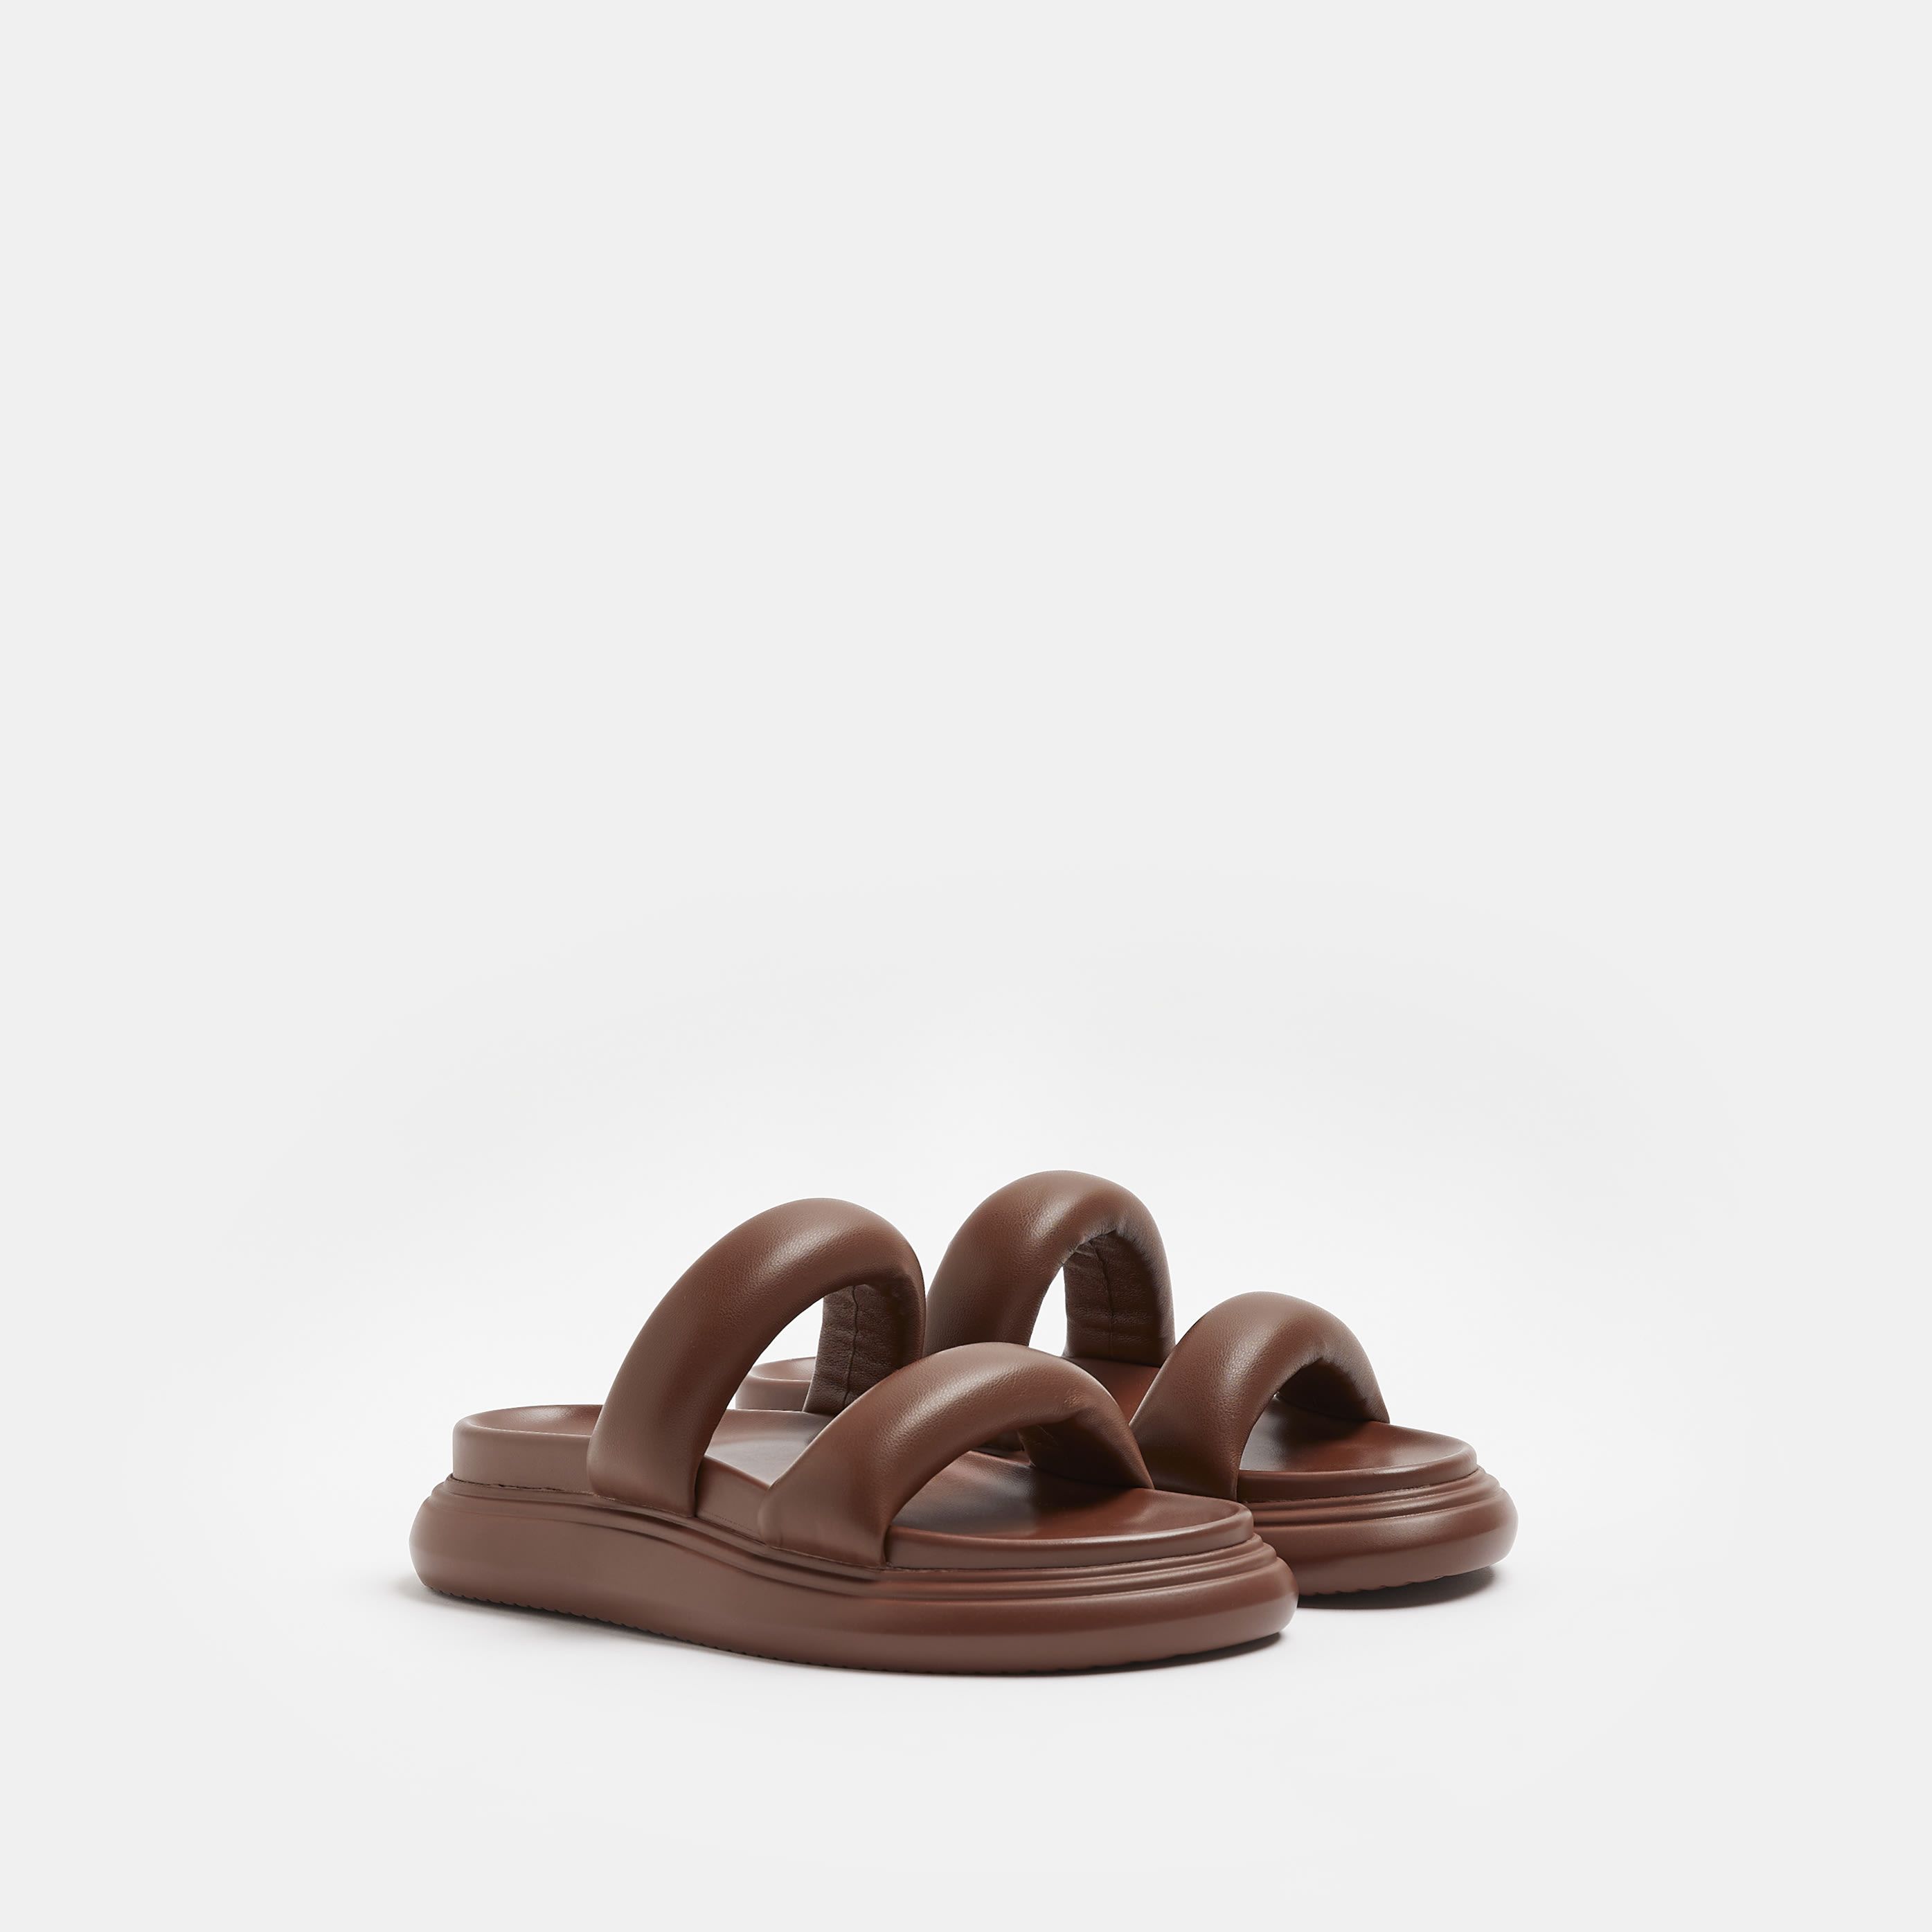 > Brand: River Island> Department: Women> Colour: Brown> Type: Sandal> Style: Flip-Flop> Material Composition: Upper: PU, Sole: Polyester> Material: PU> Upper Material: PU> Pattern: No Pattern> Occasion: Casual> Season: AW22> Closure: Slip On> Shoe Width: Standard> Heel Style: Flat